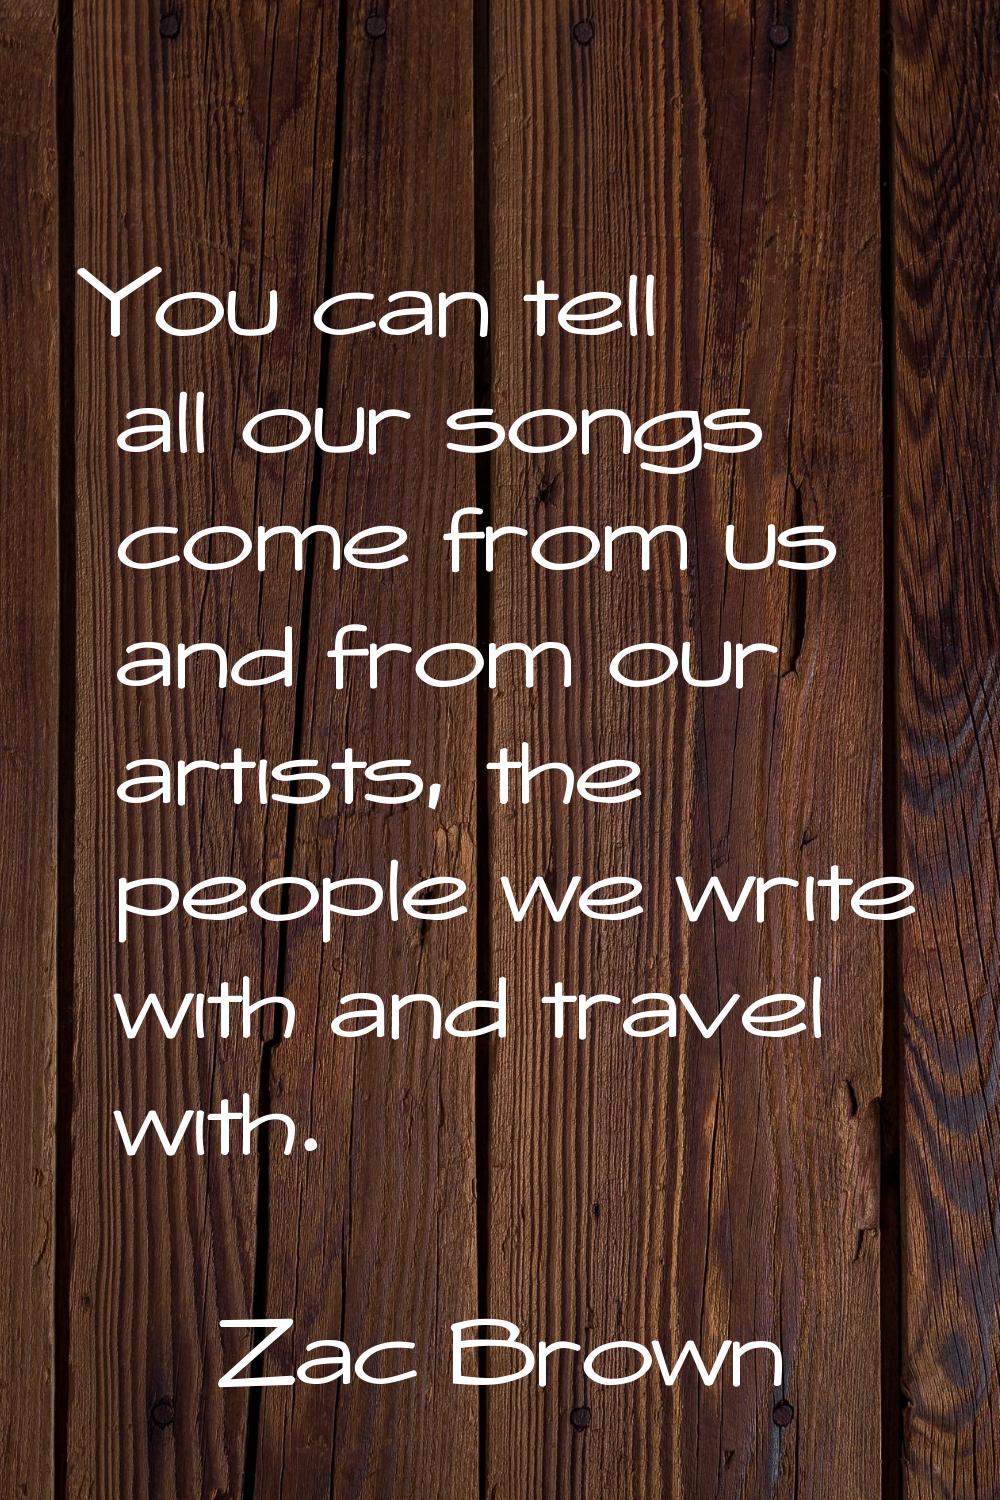 You can tell all our songs come from us and from our artists, the people we write with and travel w